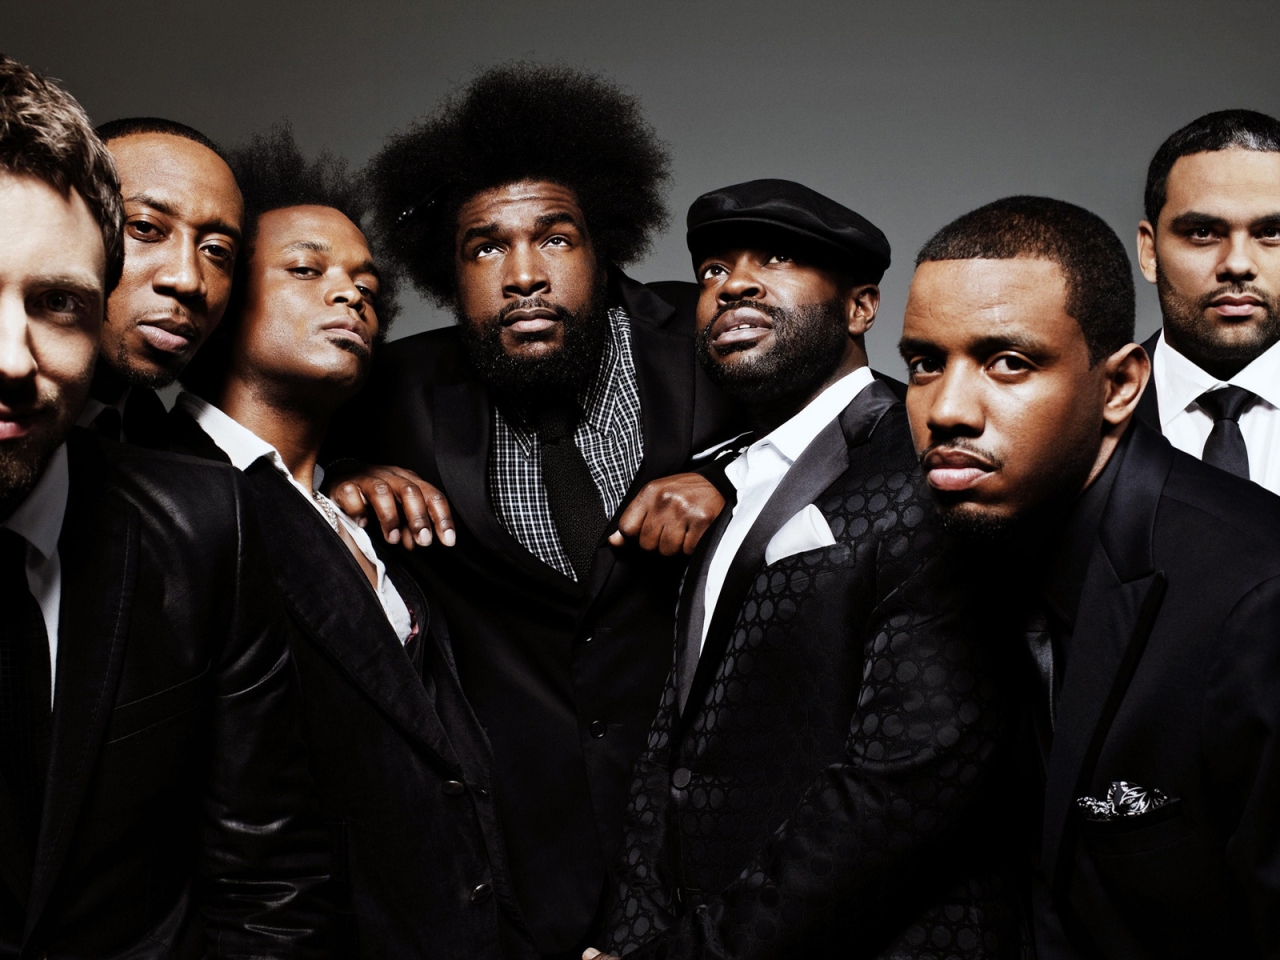 The Roots Band Photo Session for 1280 x 960 resolution